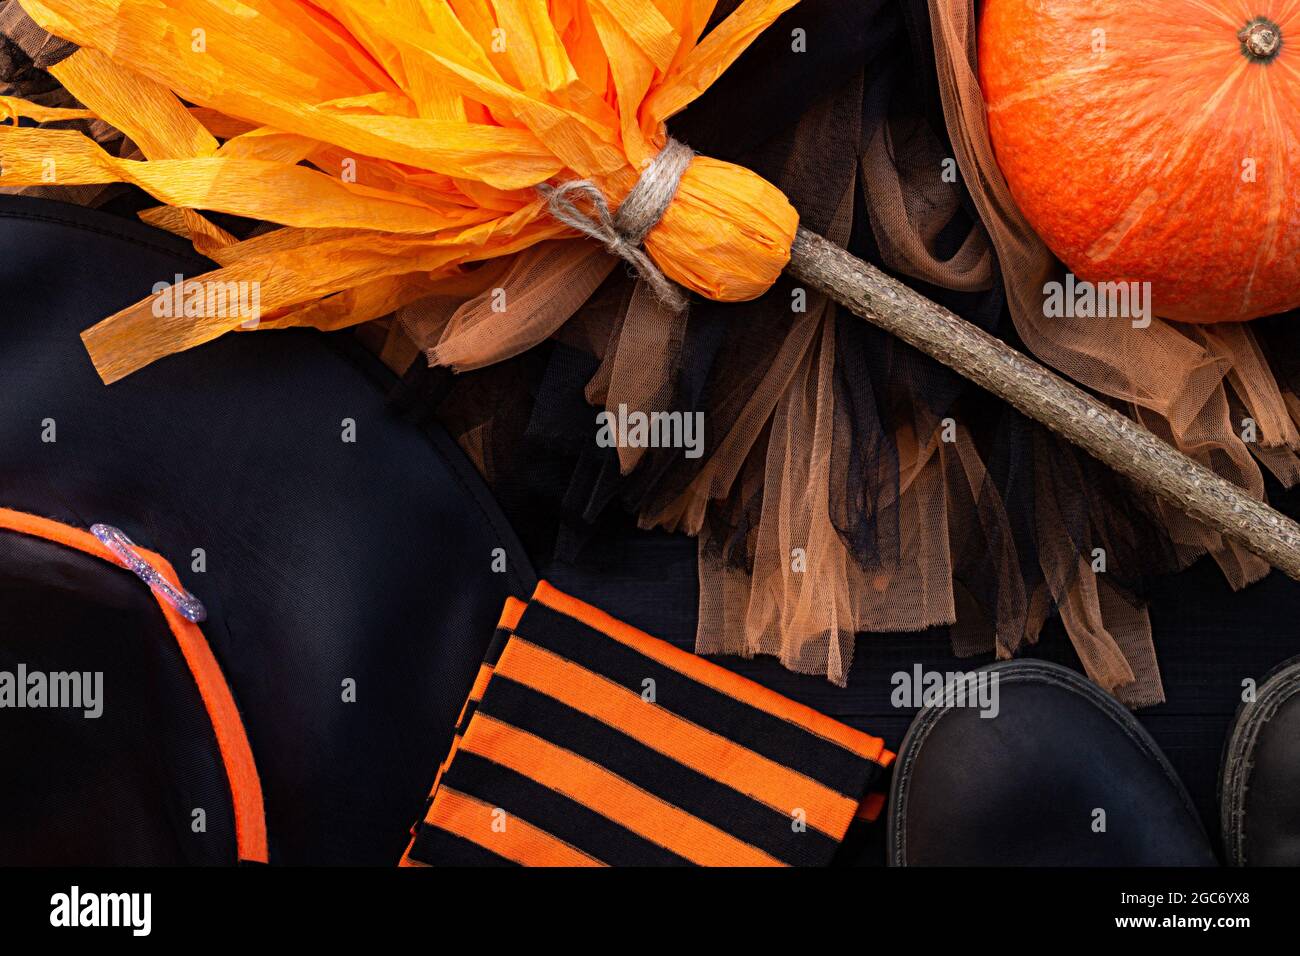 Orange and black Halloween flatlay. Witch clothes: stockings, boots, hat, broom, skirt Stock Photo